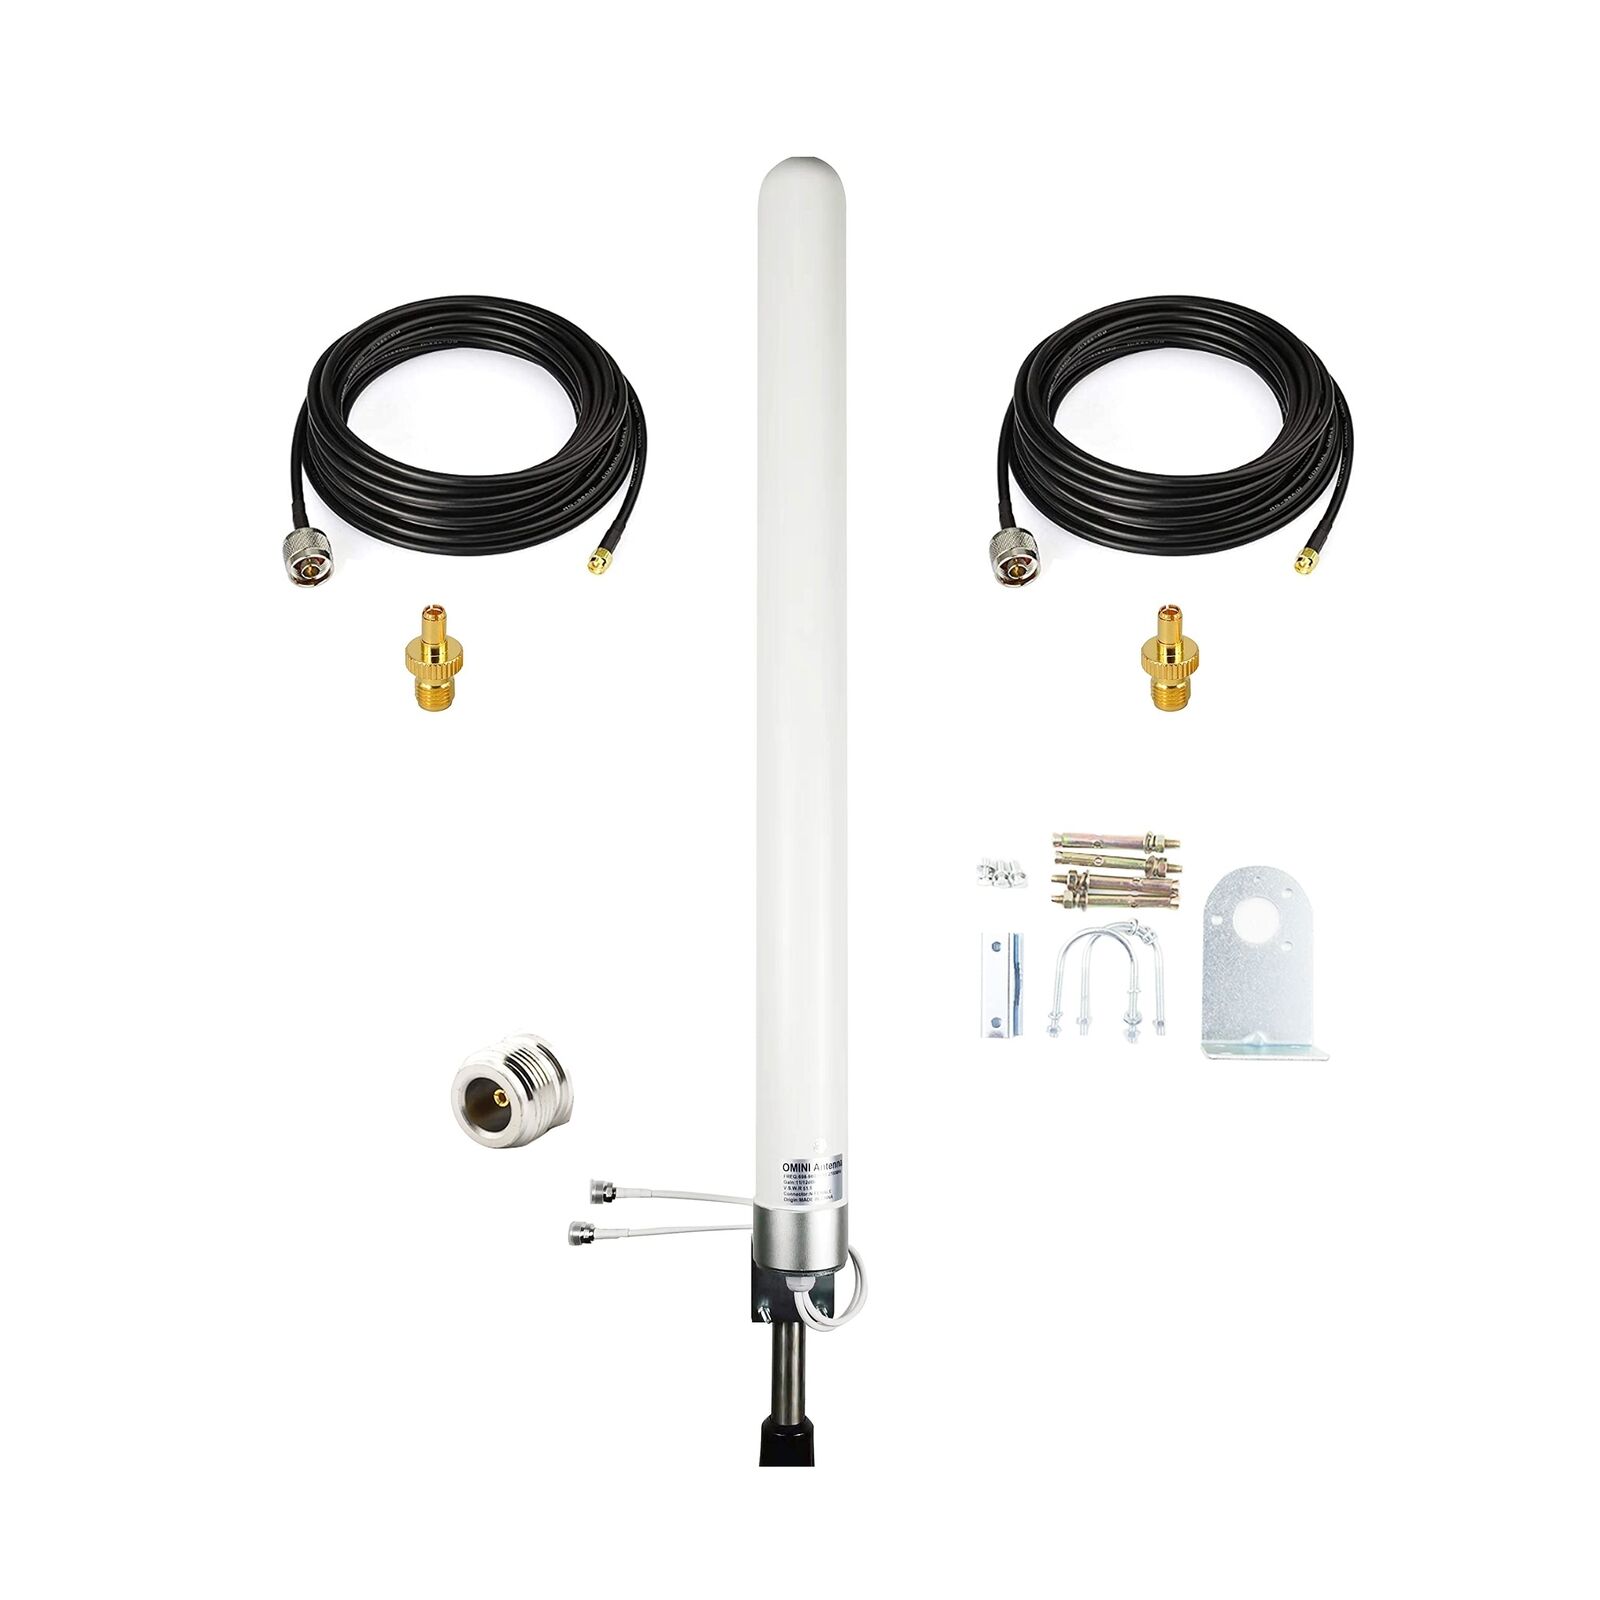 Dual Mimo Outdoor Antenna-4G LTE WiFi Omni-Directional Antenna for Router Mob...